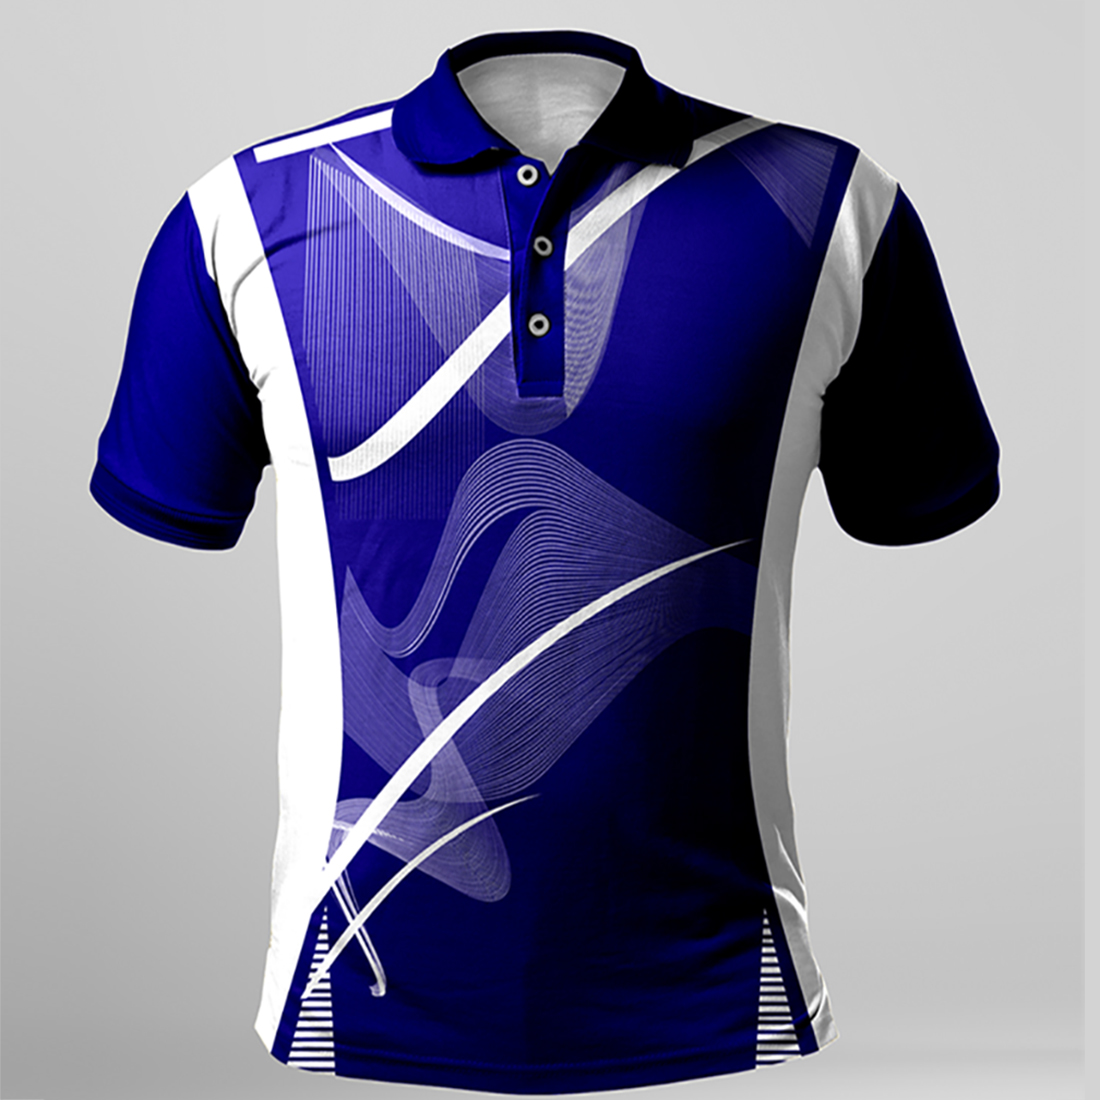 Cricket Jersey designs, themes, templates and downloadable graphic